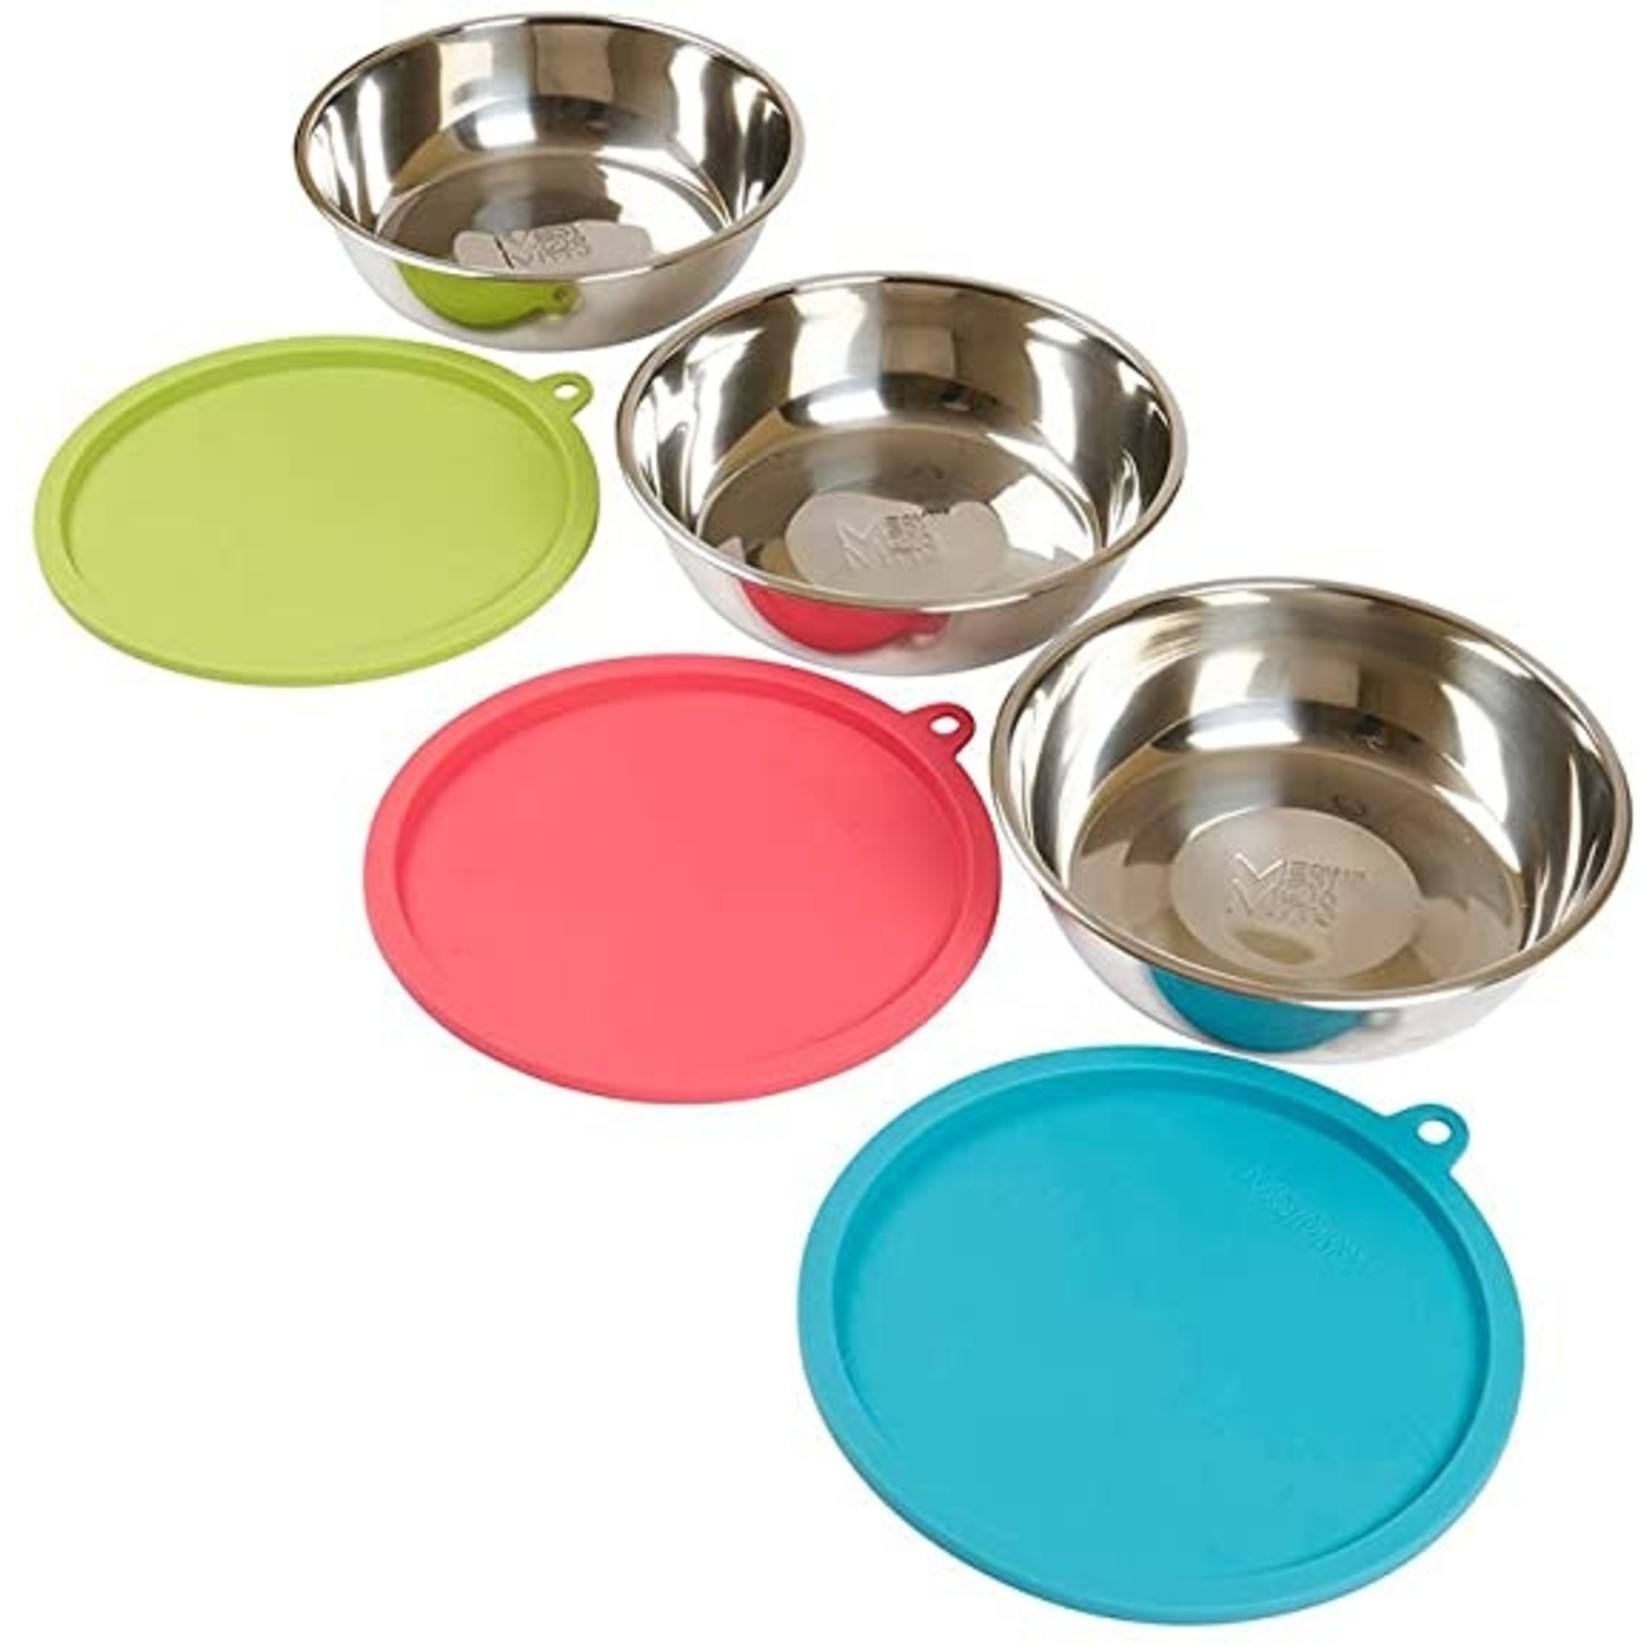 Messy Mutts Messy Mutts S/S BOWL SET XLARGE 6 PC 3 BOWLS 3 COVERS 6 CUP